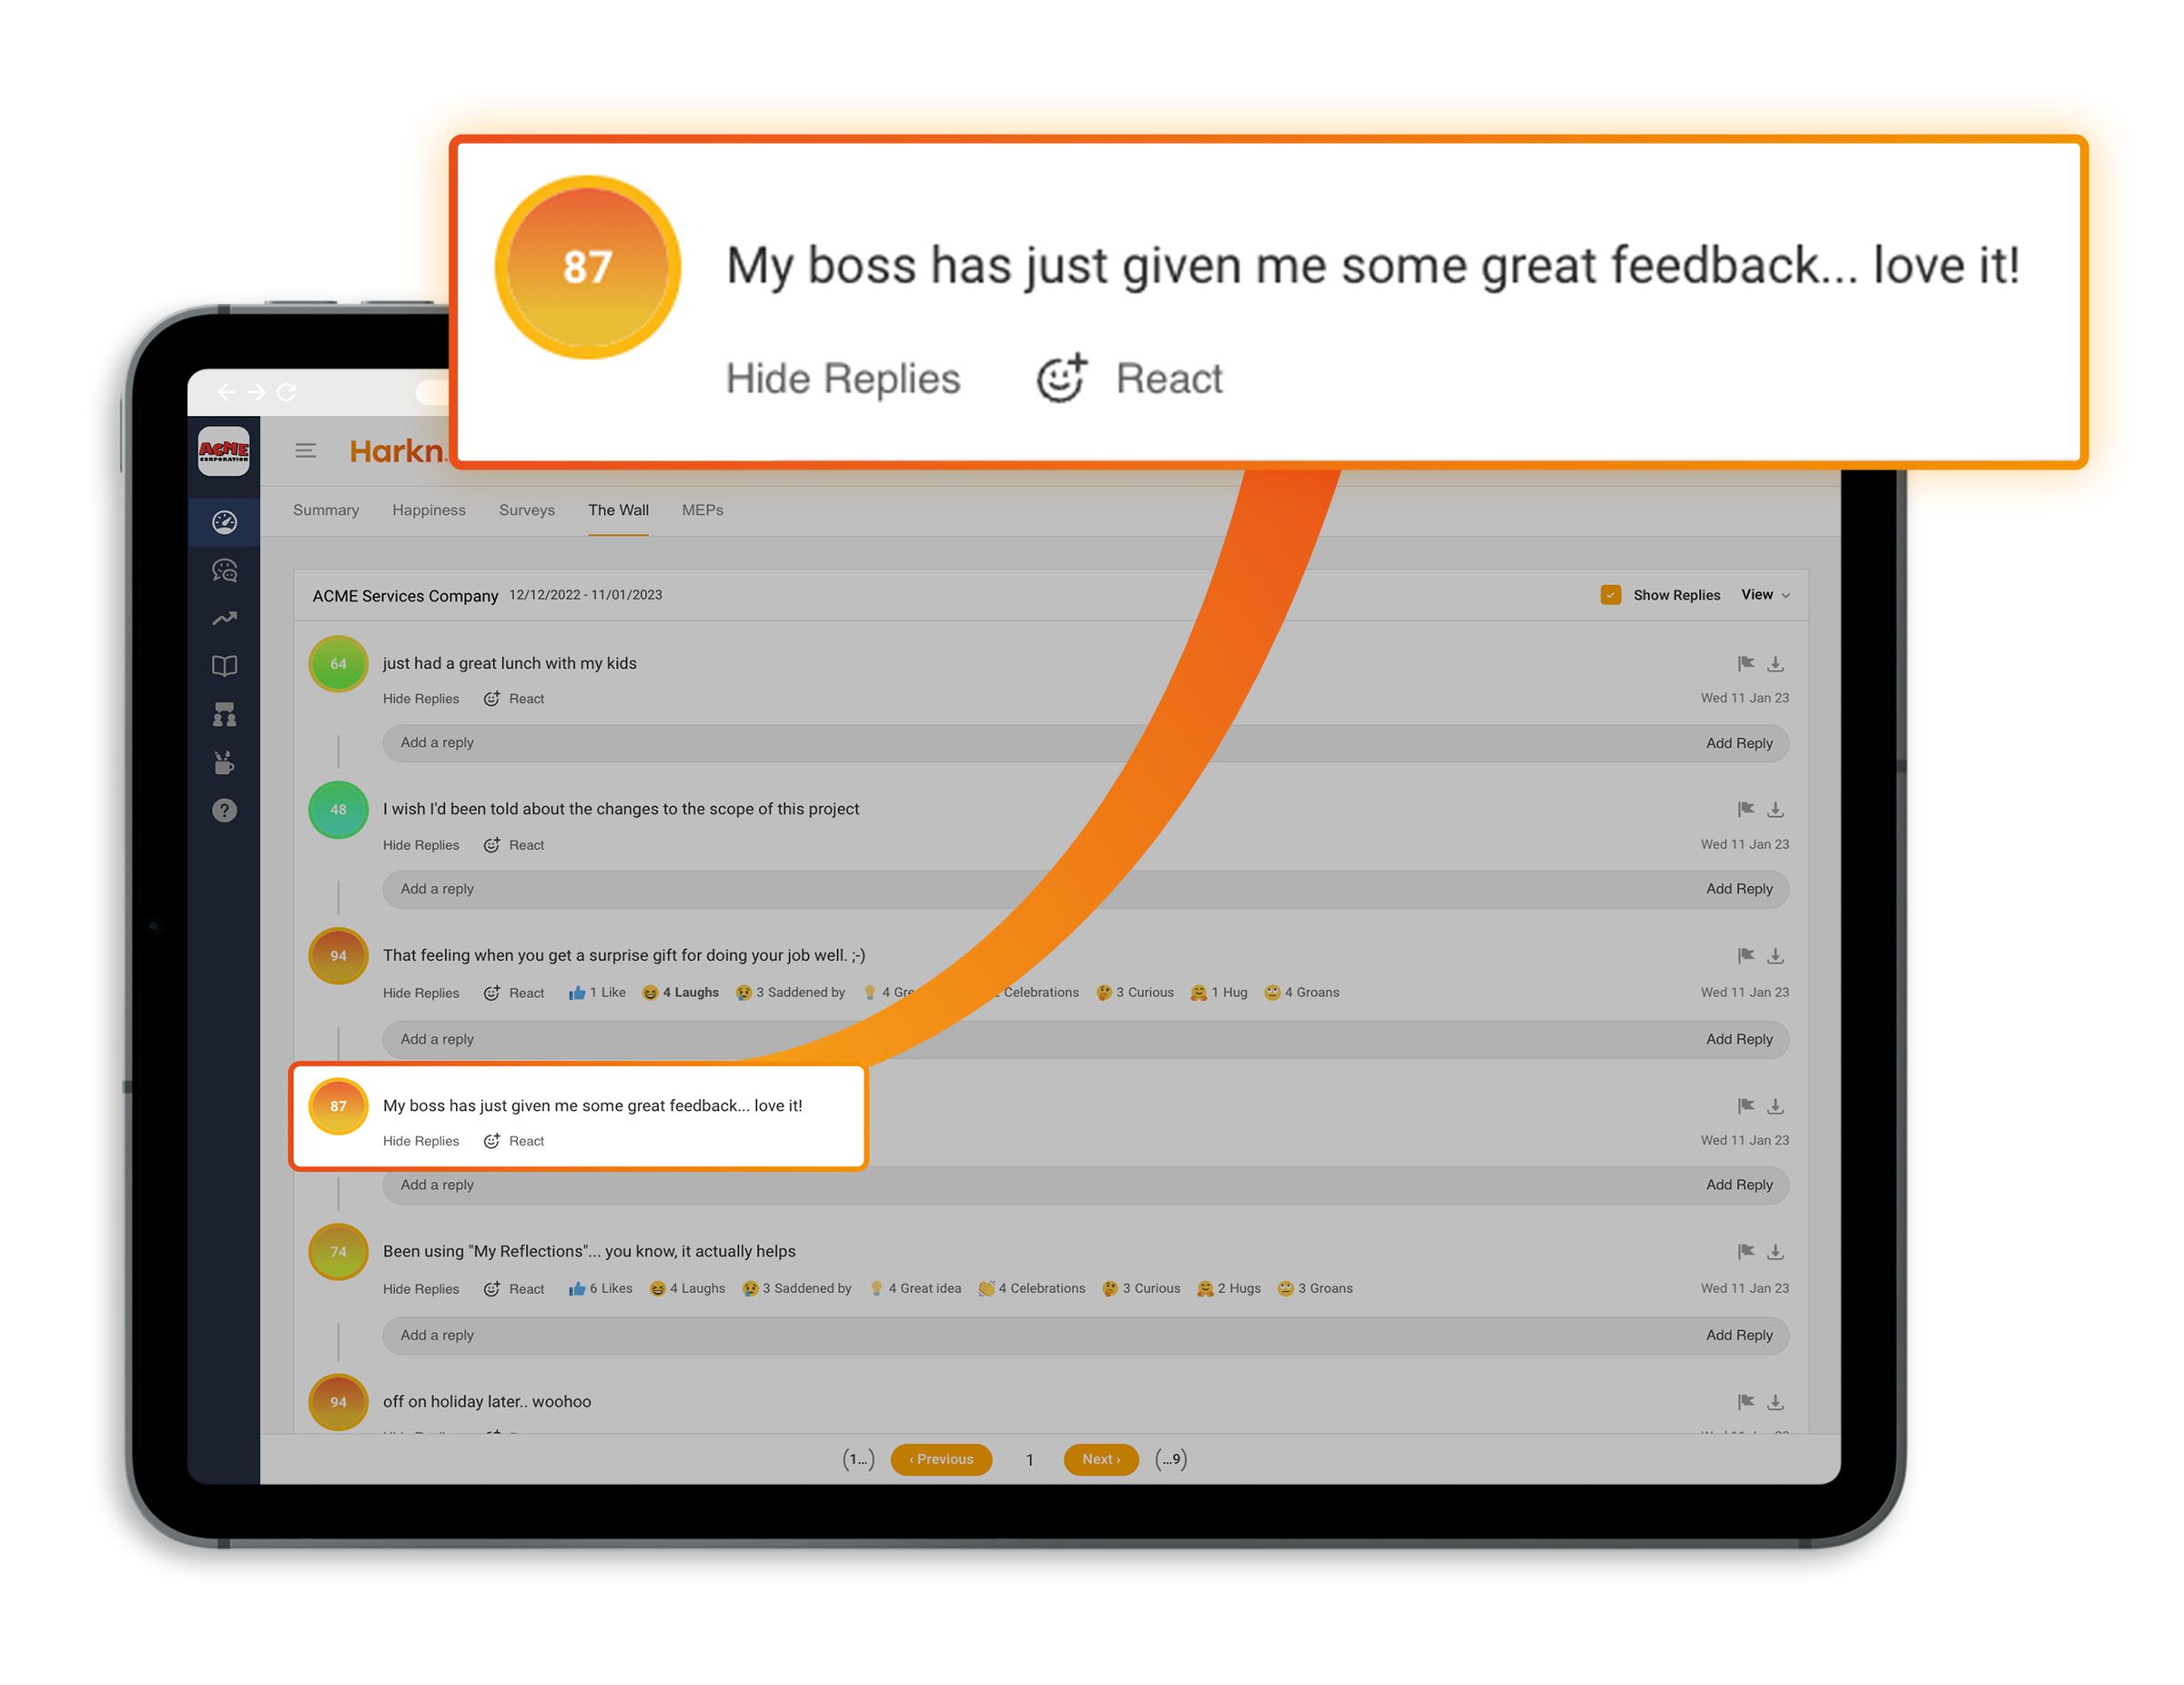 Unfiltered real-time feedback from employees